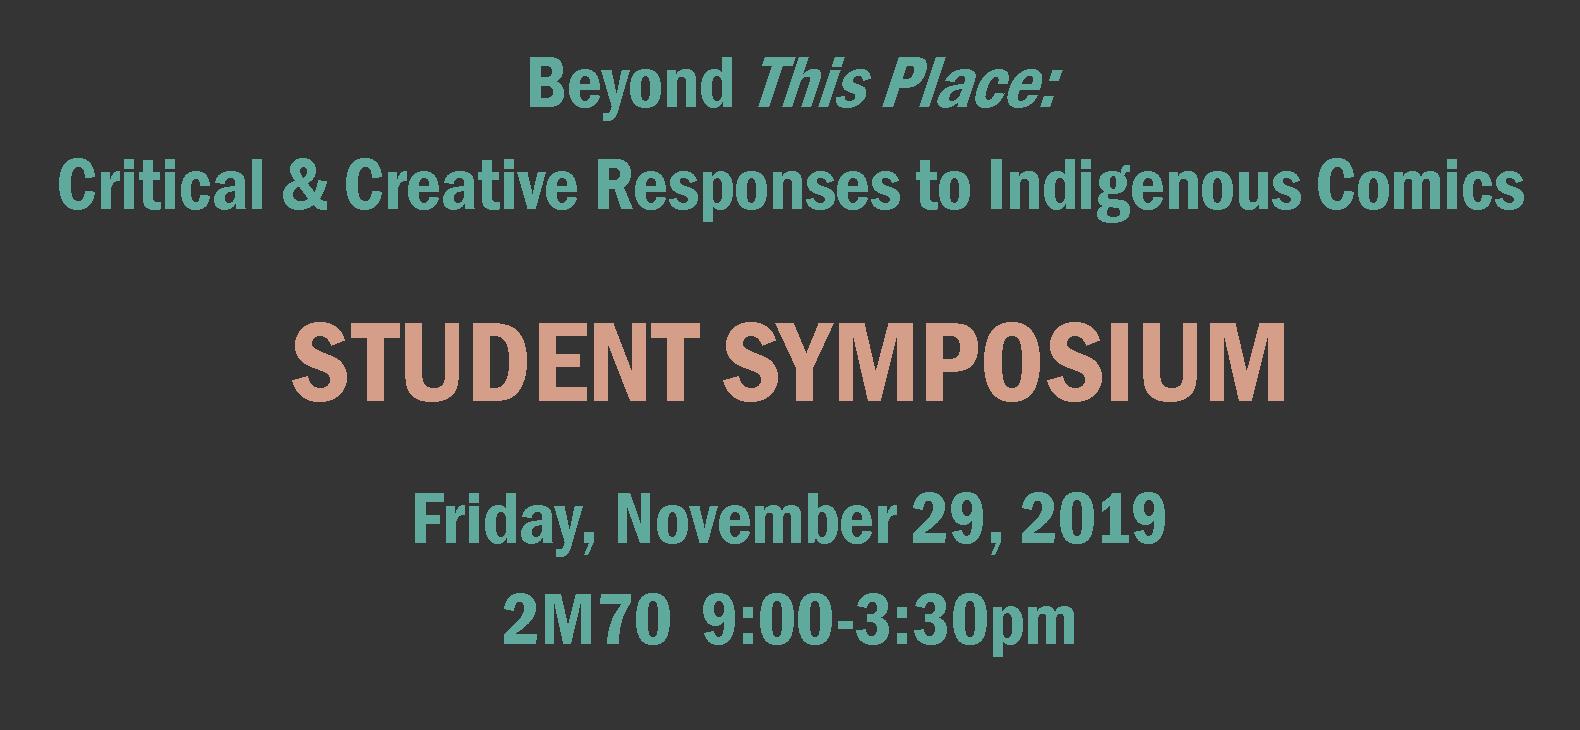 text reads Beyond This Place:  Critical & Creative Responses to Indigenous Comics  STUDENT SYMPOSIUM Friday, November 29, 2019  2M70  9:00-3:30pm